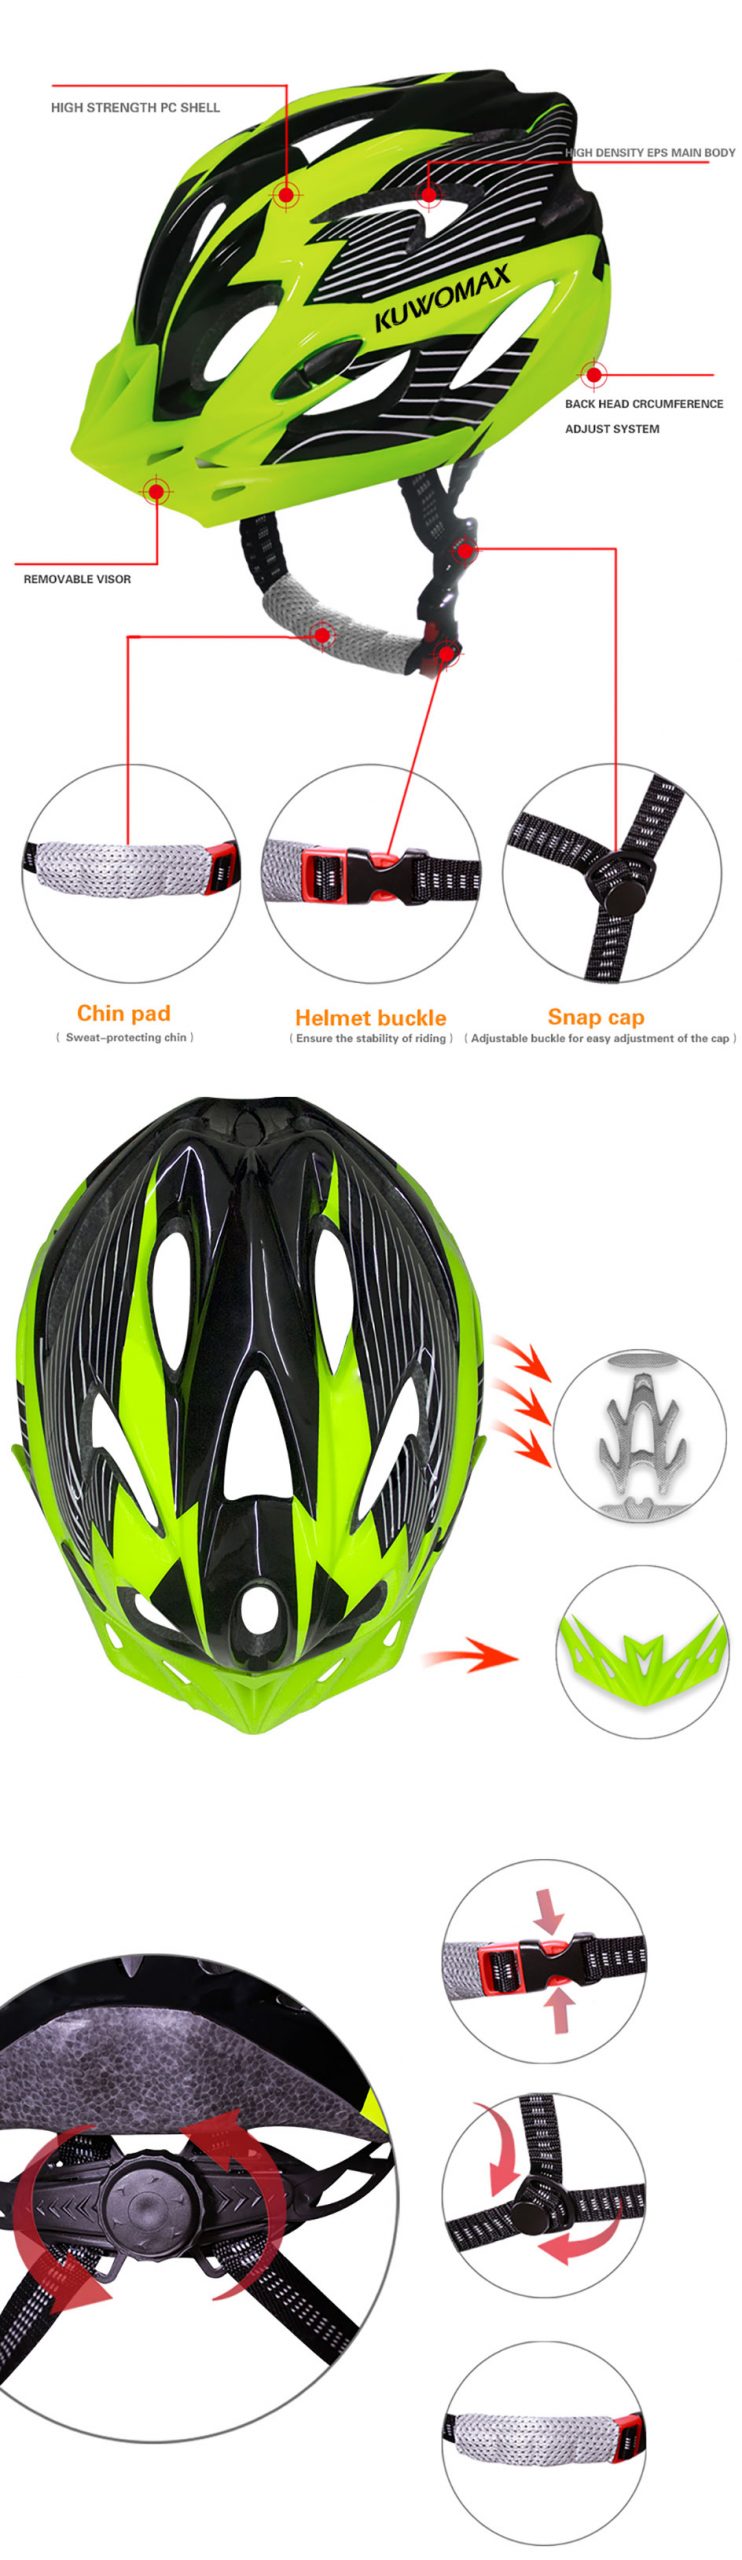 KUWOMAX Ultralight Bicycle Helmet Rider Head Protection